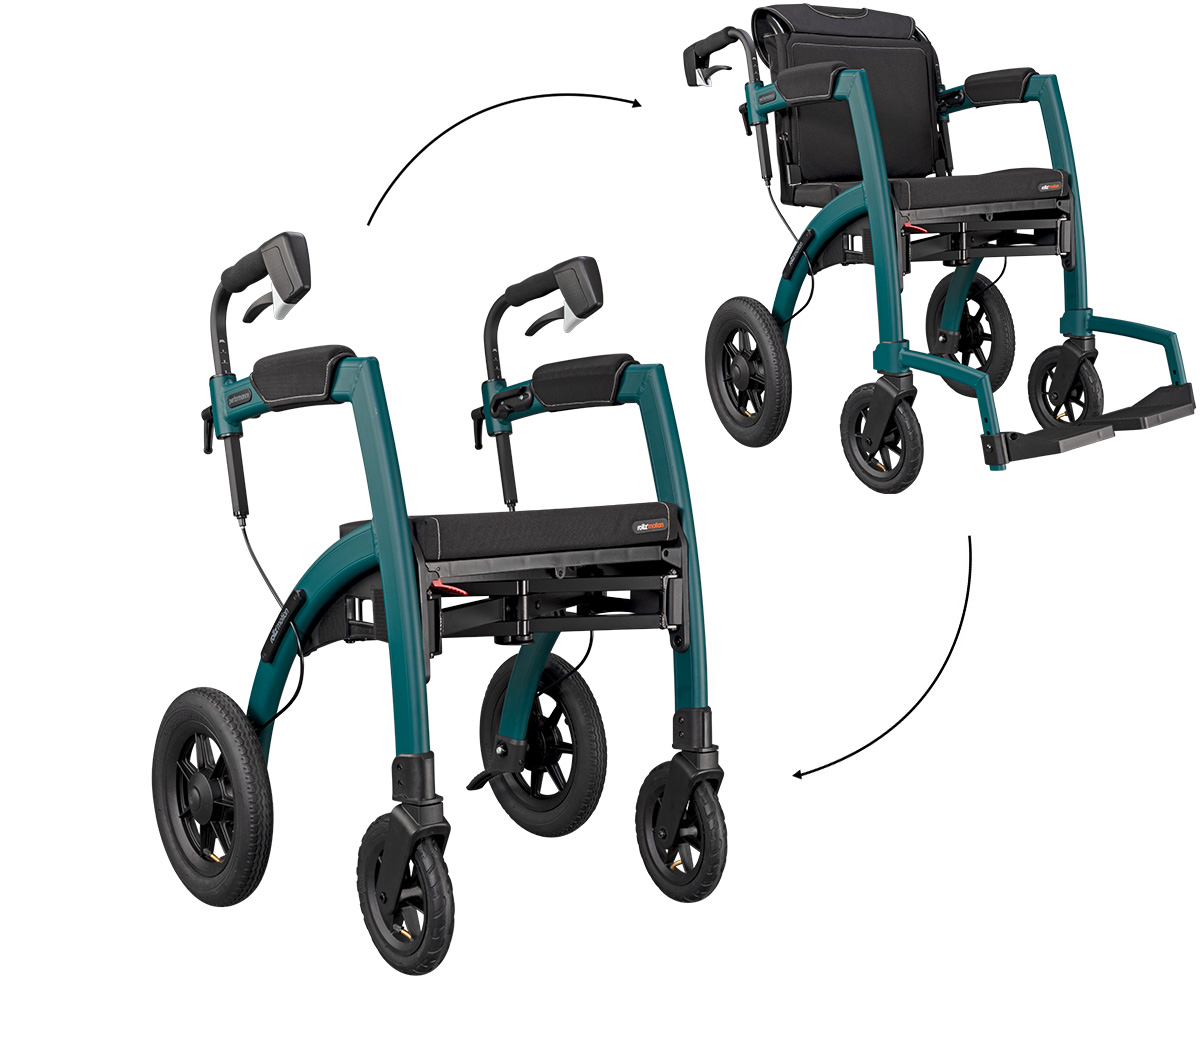 Rollz Motion Performance is the luxury version of the a Rollz rollator